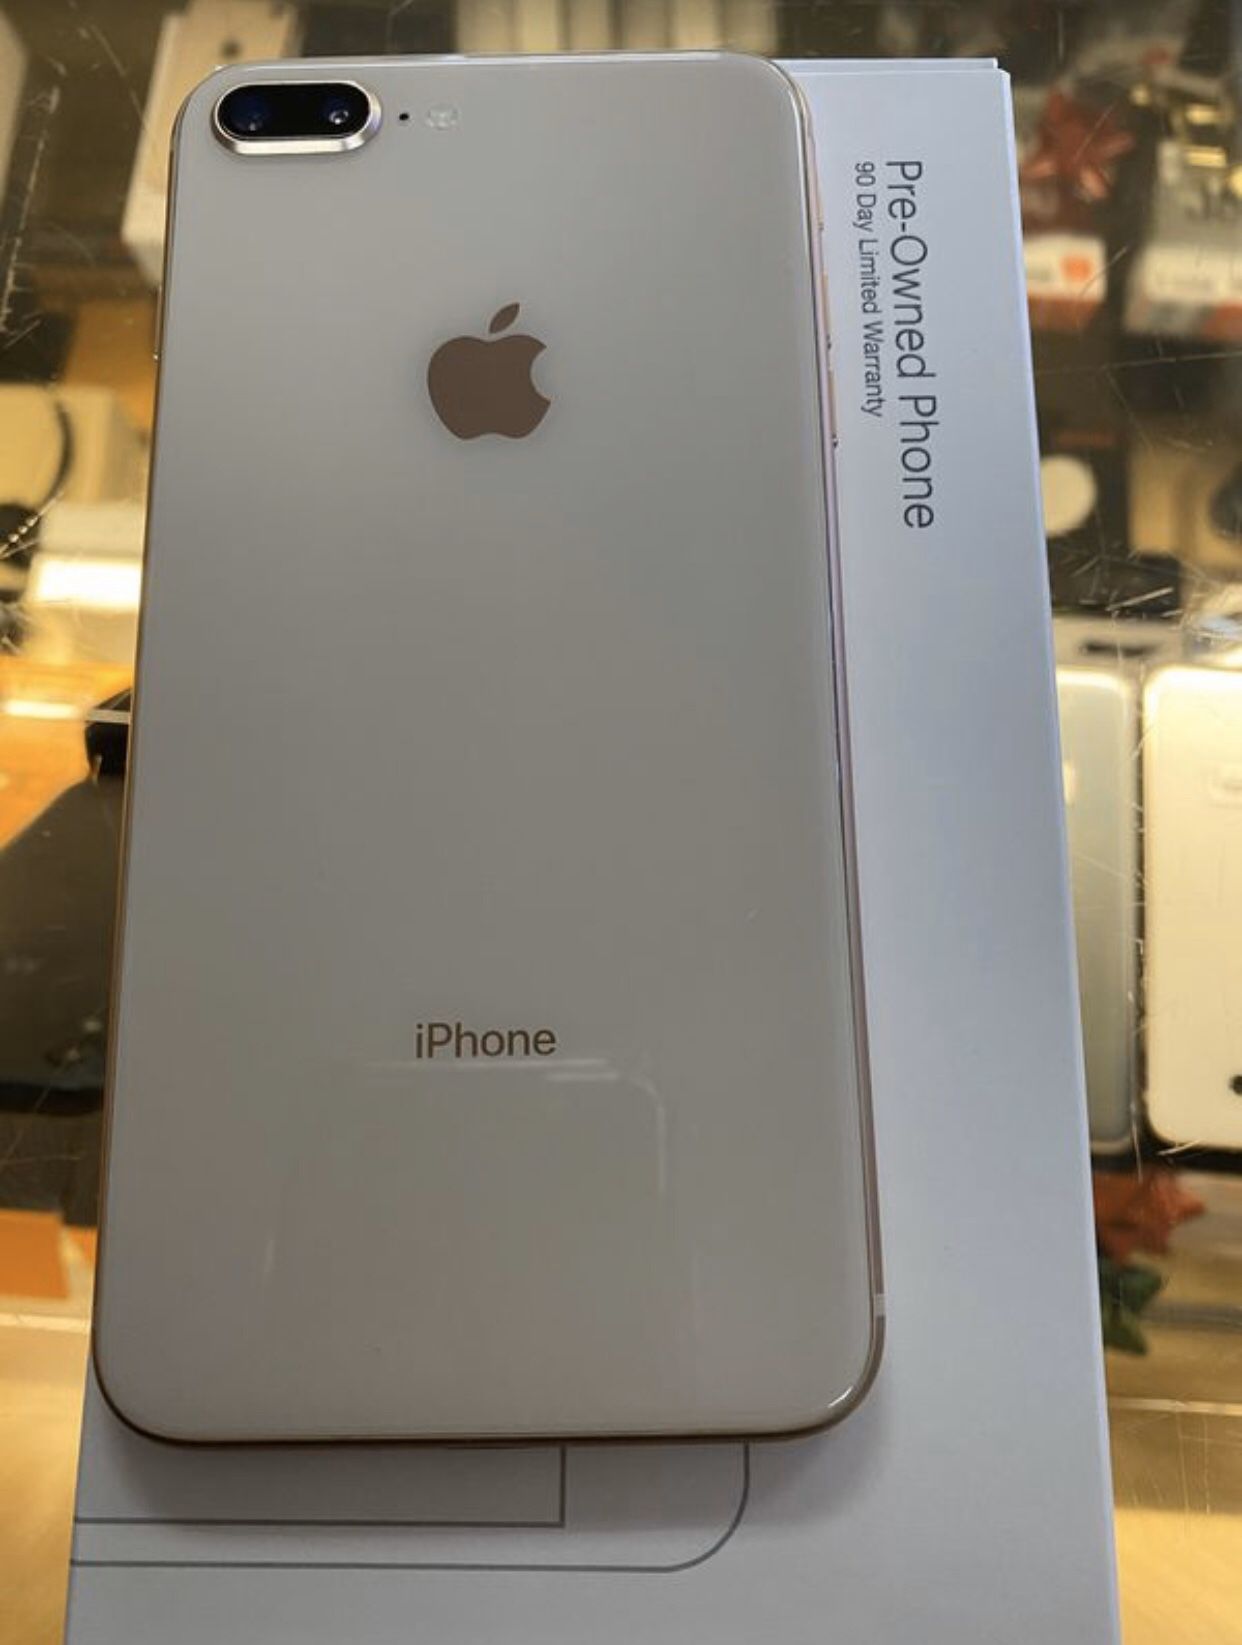 IPHONE 8 Plus pre-owned 64gb (for boost mobile only) NOT UNLOCKED. Only for new boost customers 90 day warranty through boost. GOLD! Includes first m